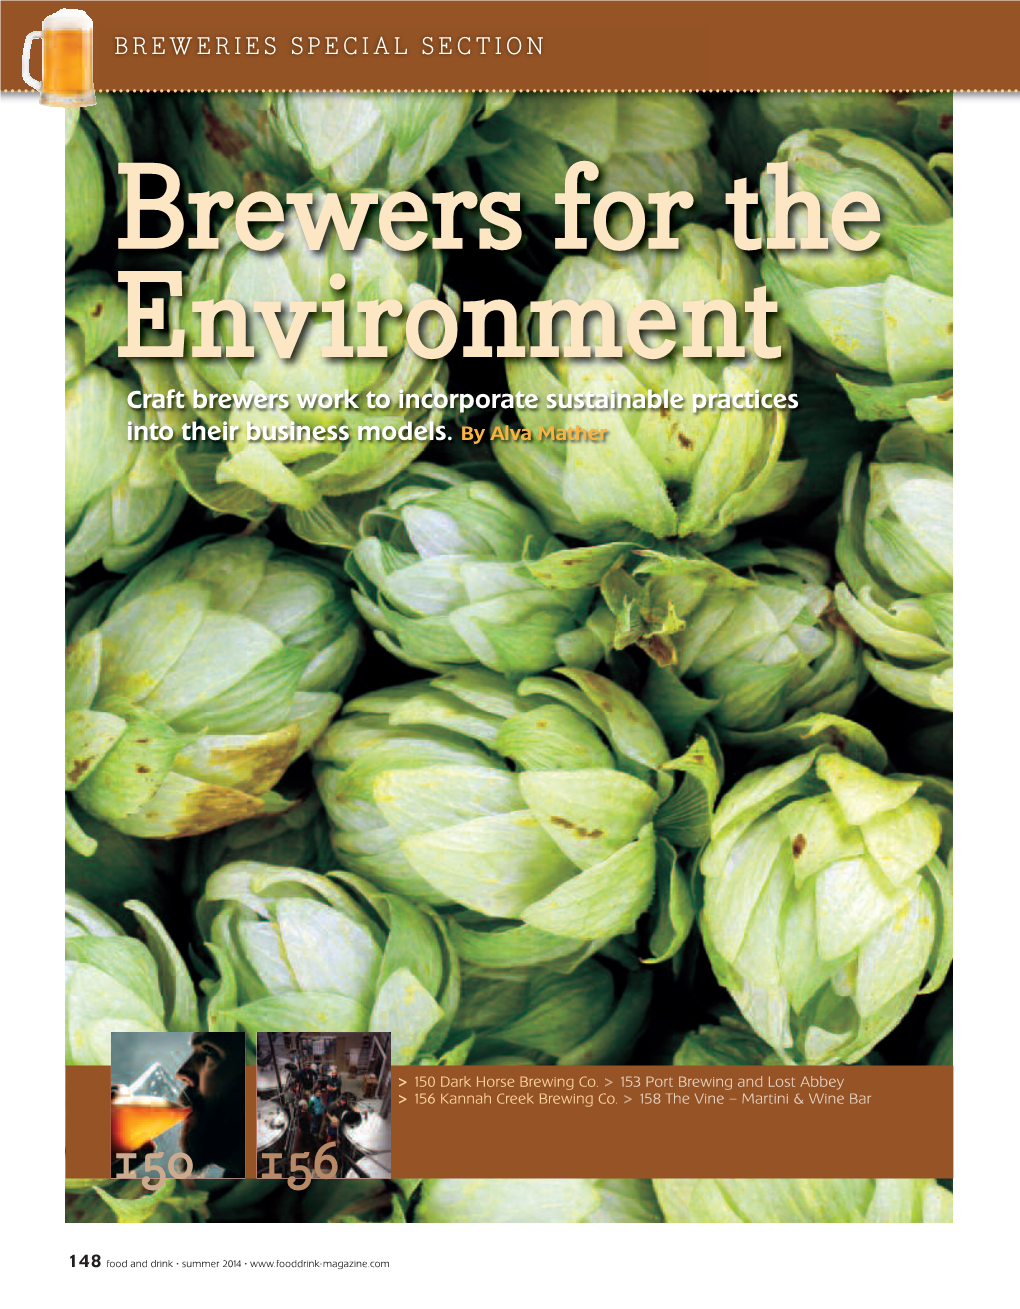 BREWERIES SPECIAL SECTION Brewers for the En Viro Nment Craft Brewers Work to Incorporate Sustainable Practices Into Their Business Models